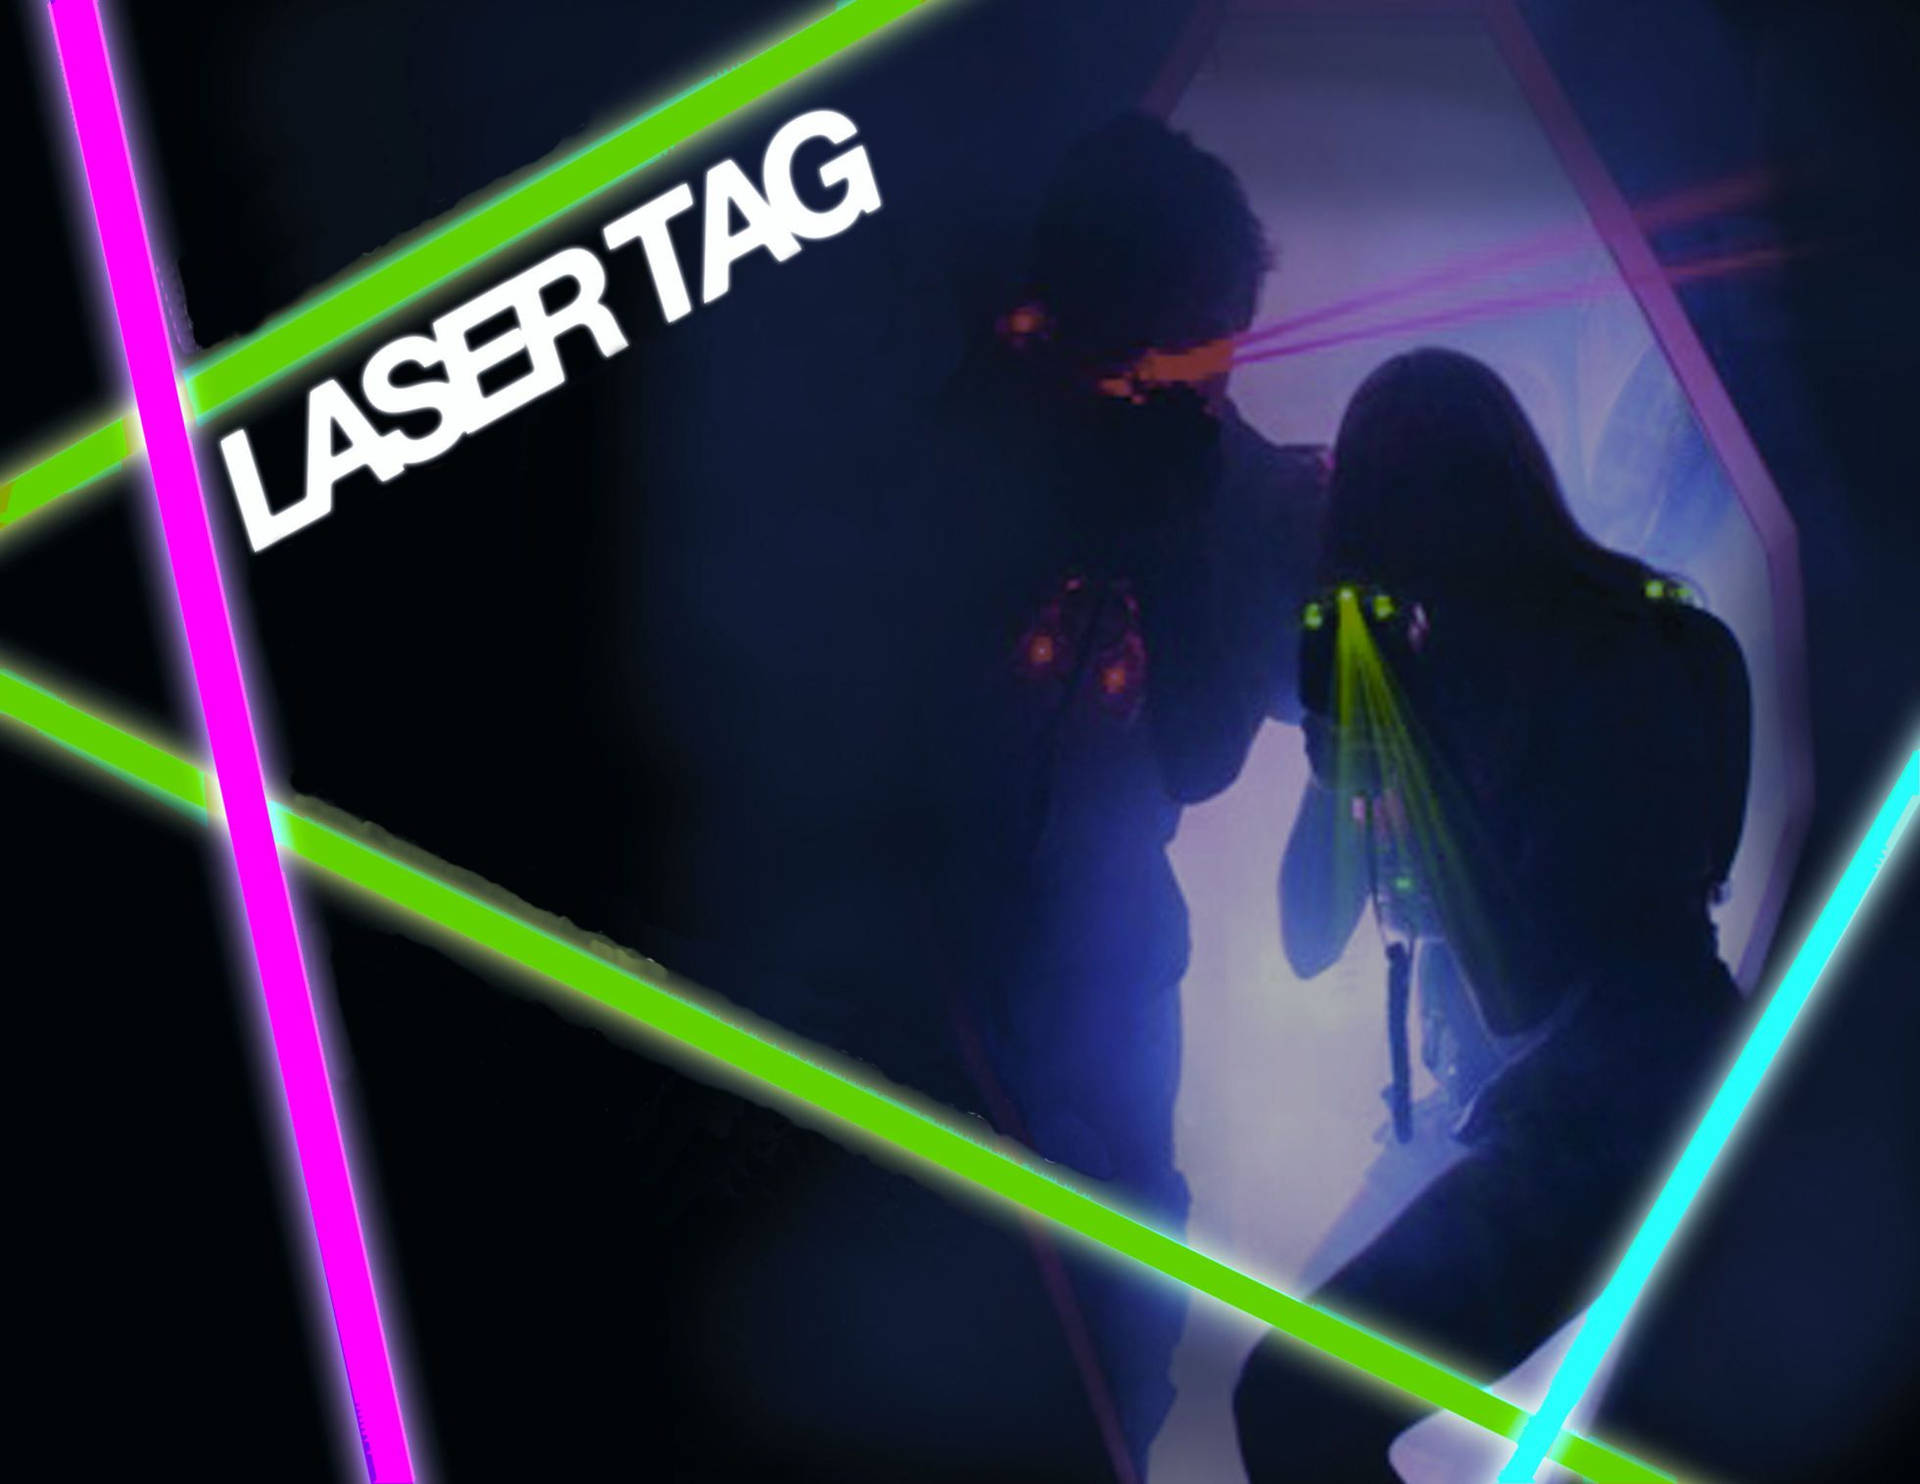 Laser Tag Pictures Wallpaper